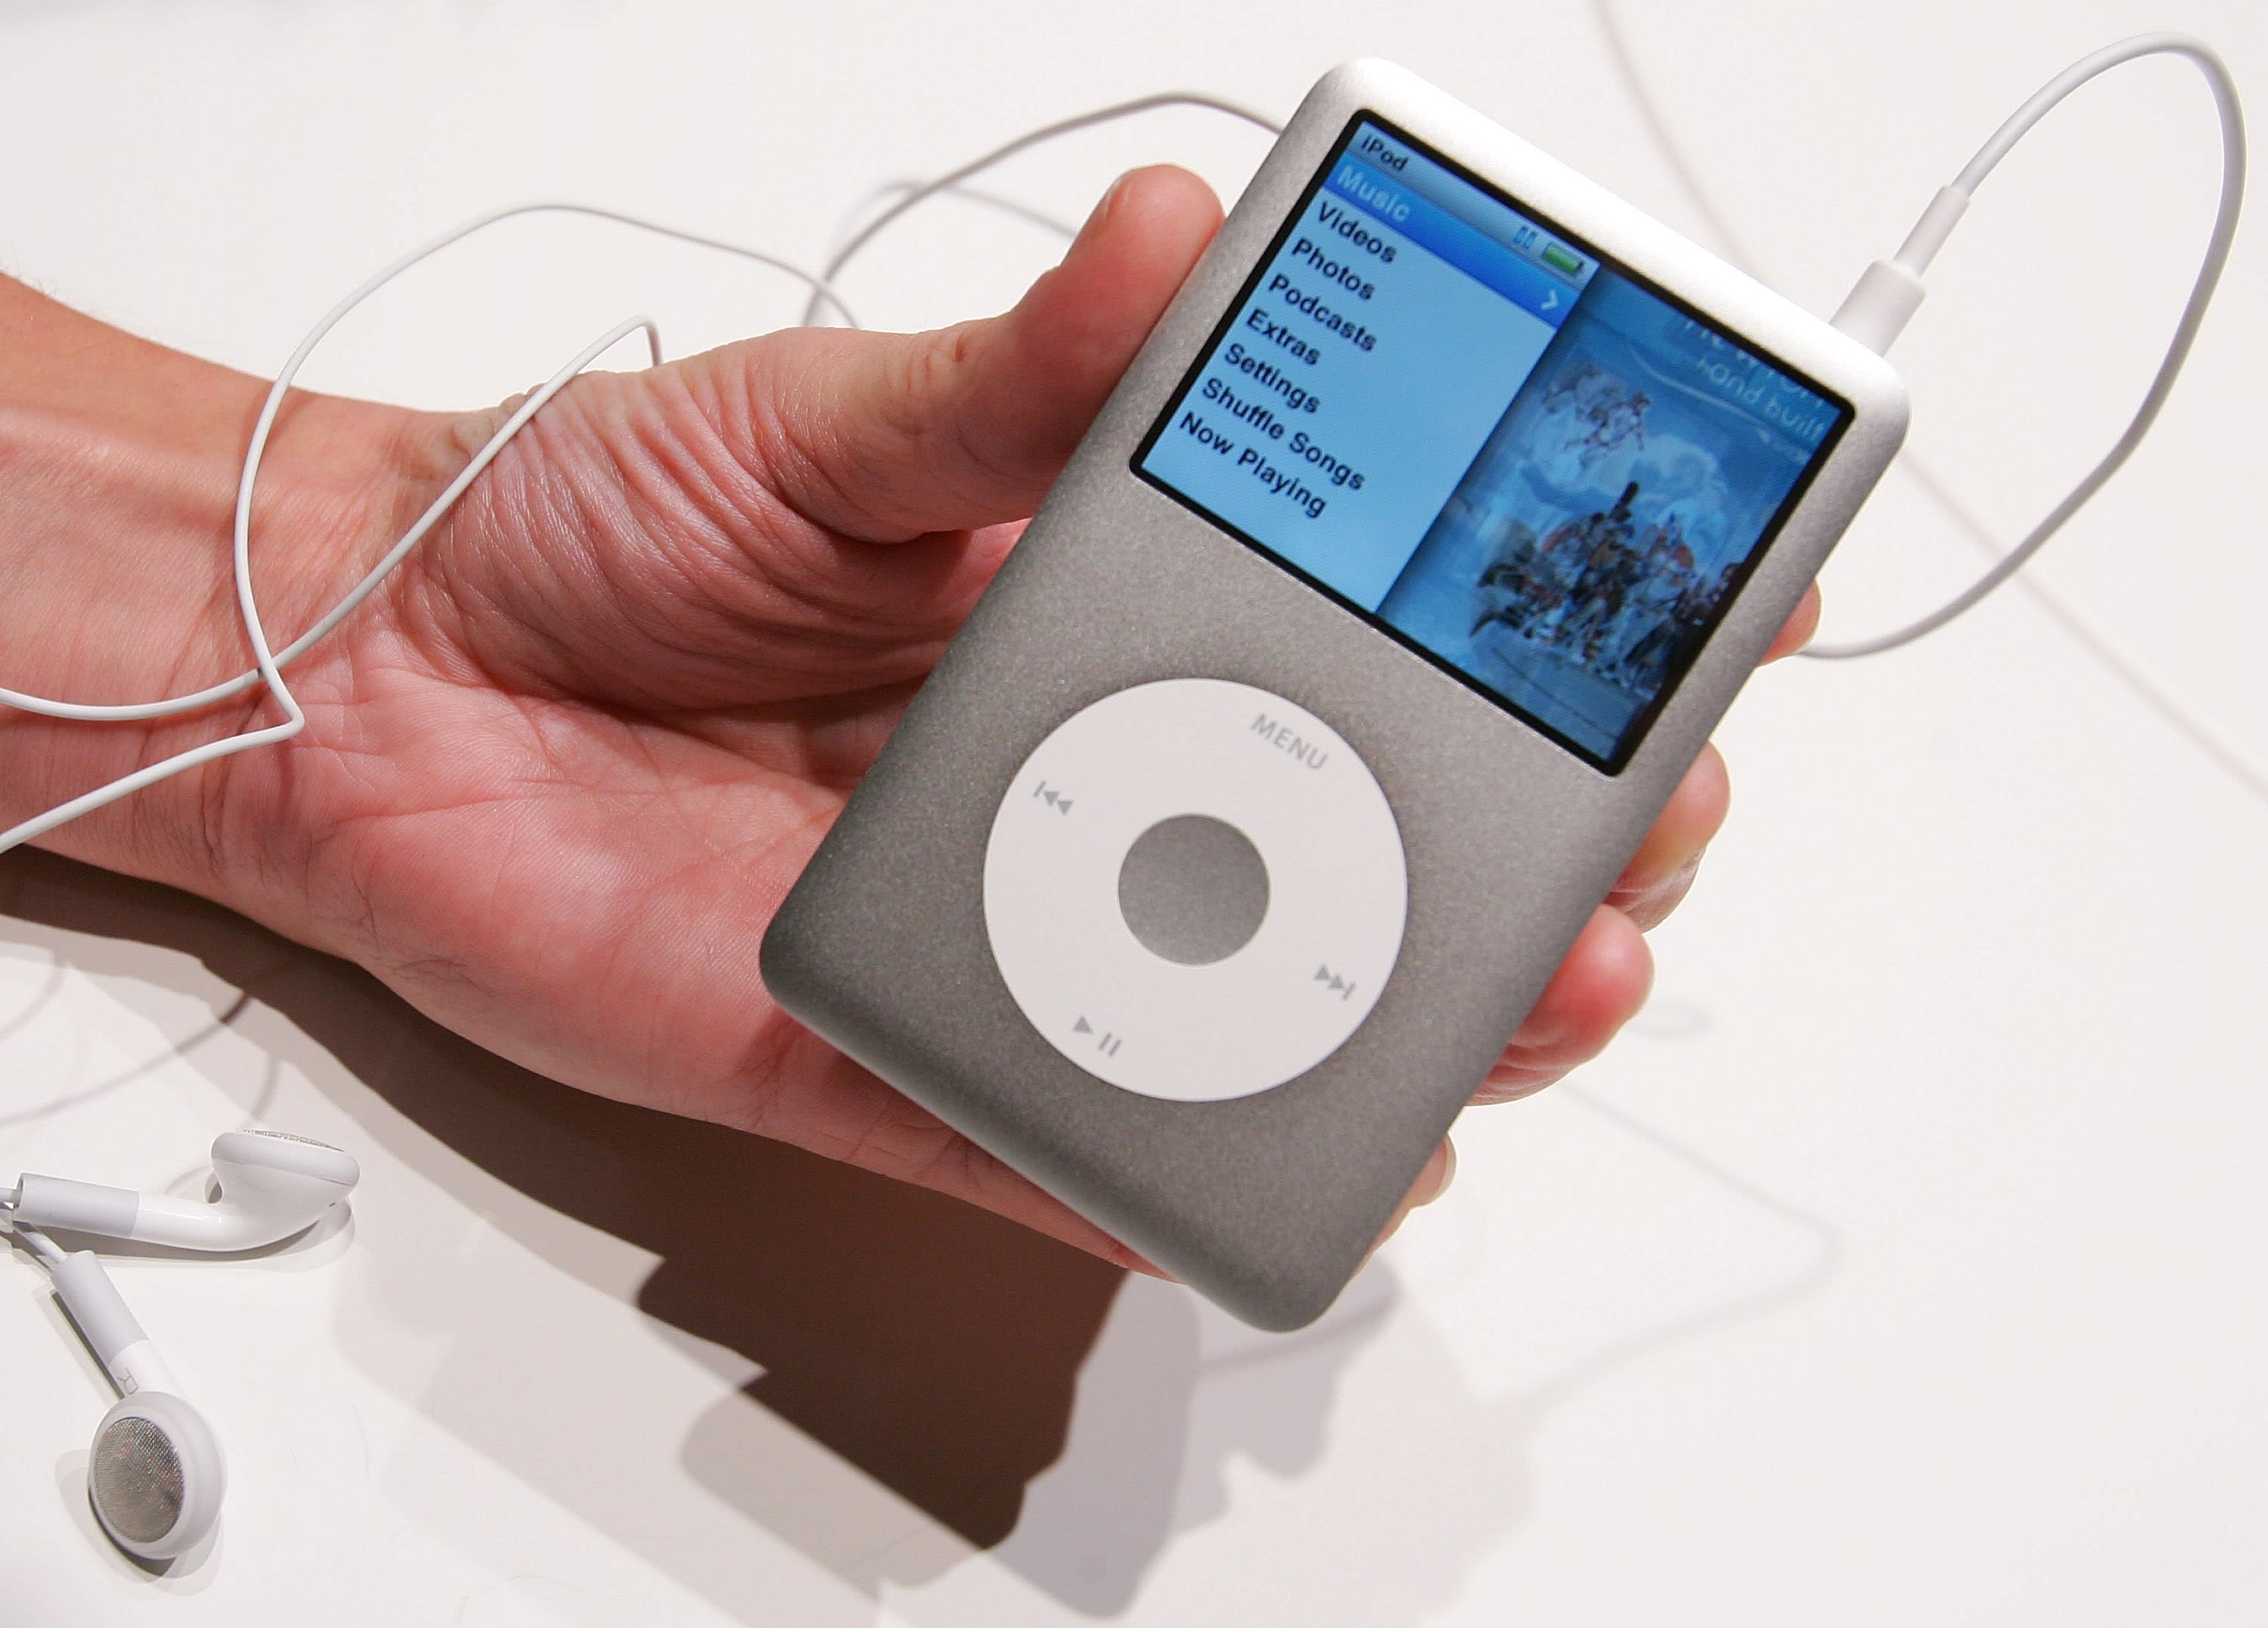 download the last version for ipod QuickHash 3.3.2